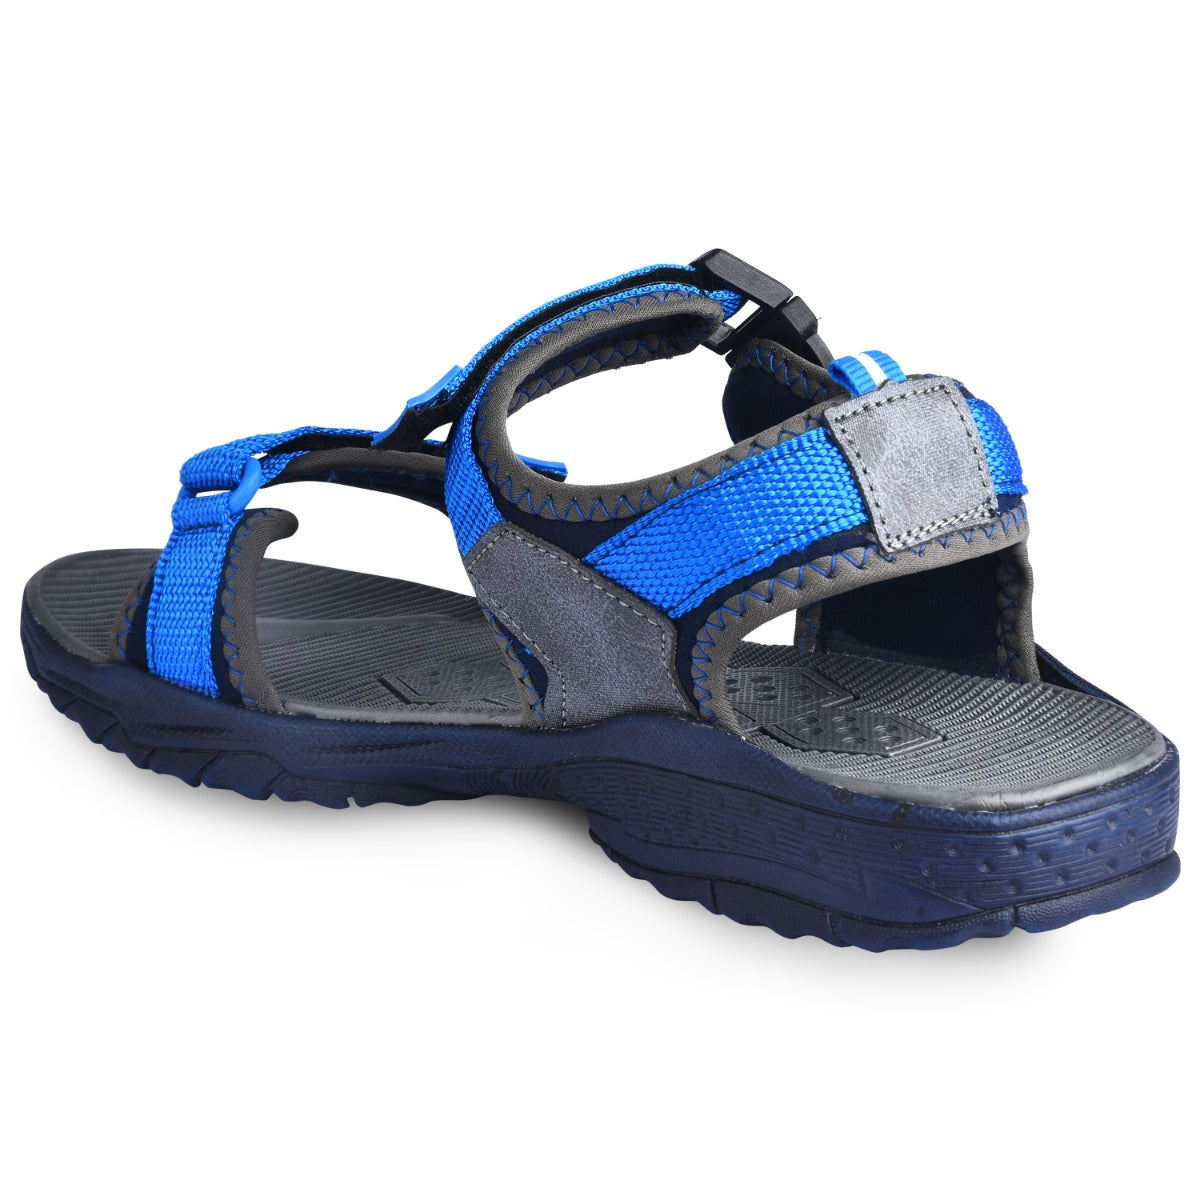 Paragon Blot FBK1415G Men Stylish Sandals | Comfortable Sandals for Daily Outdoor Use | Casual Formal Sandals with Cushioned Soles